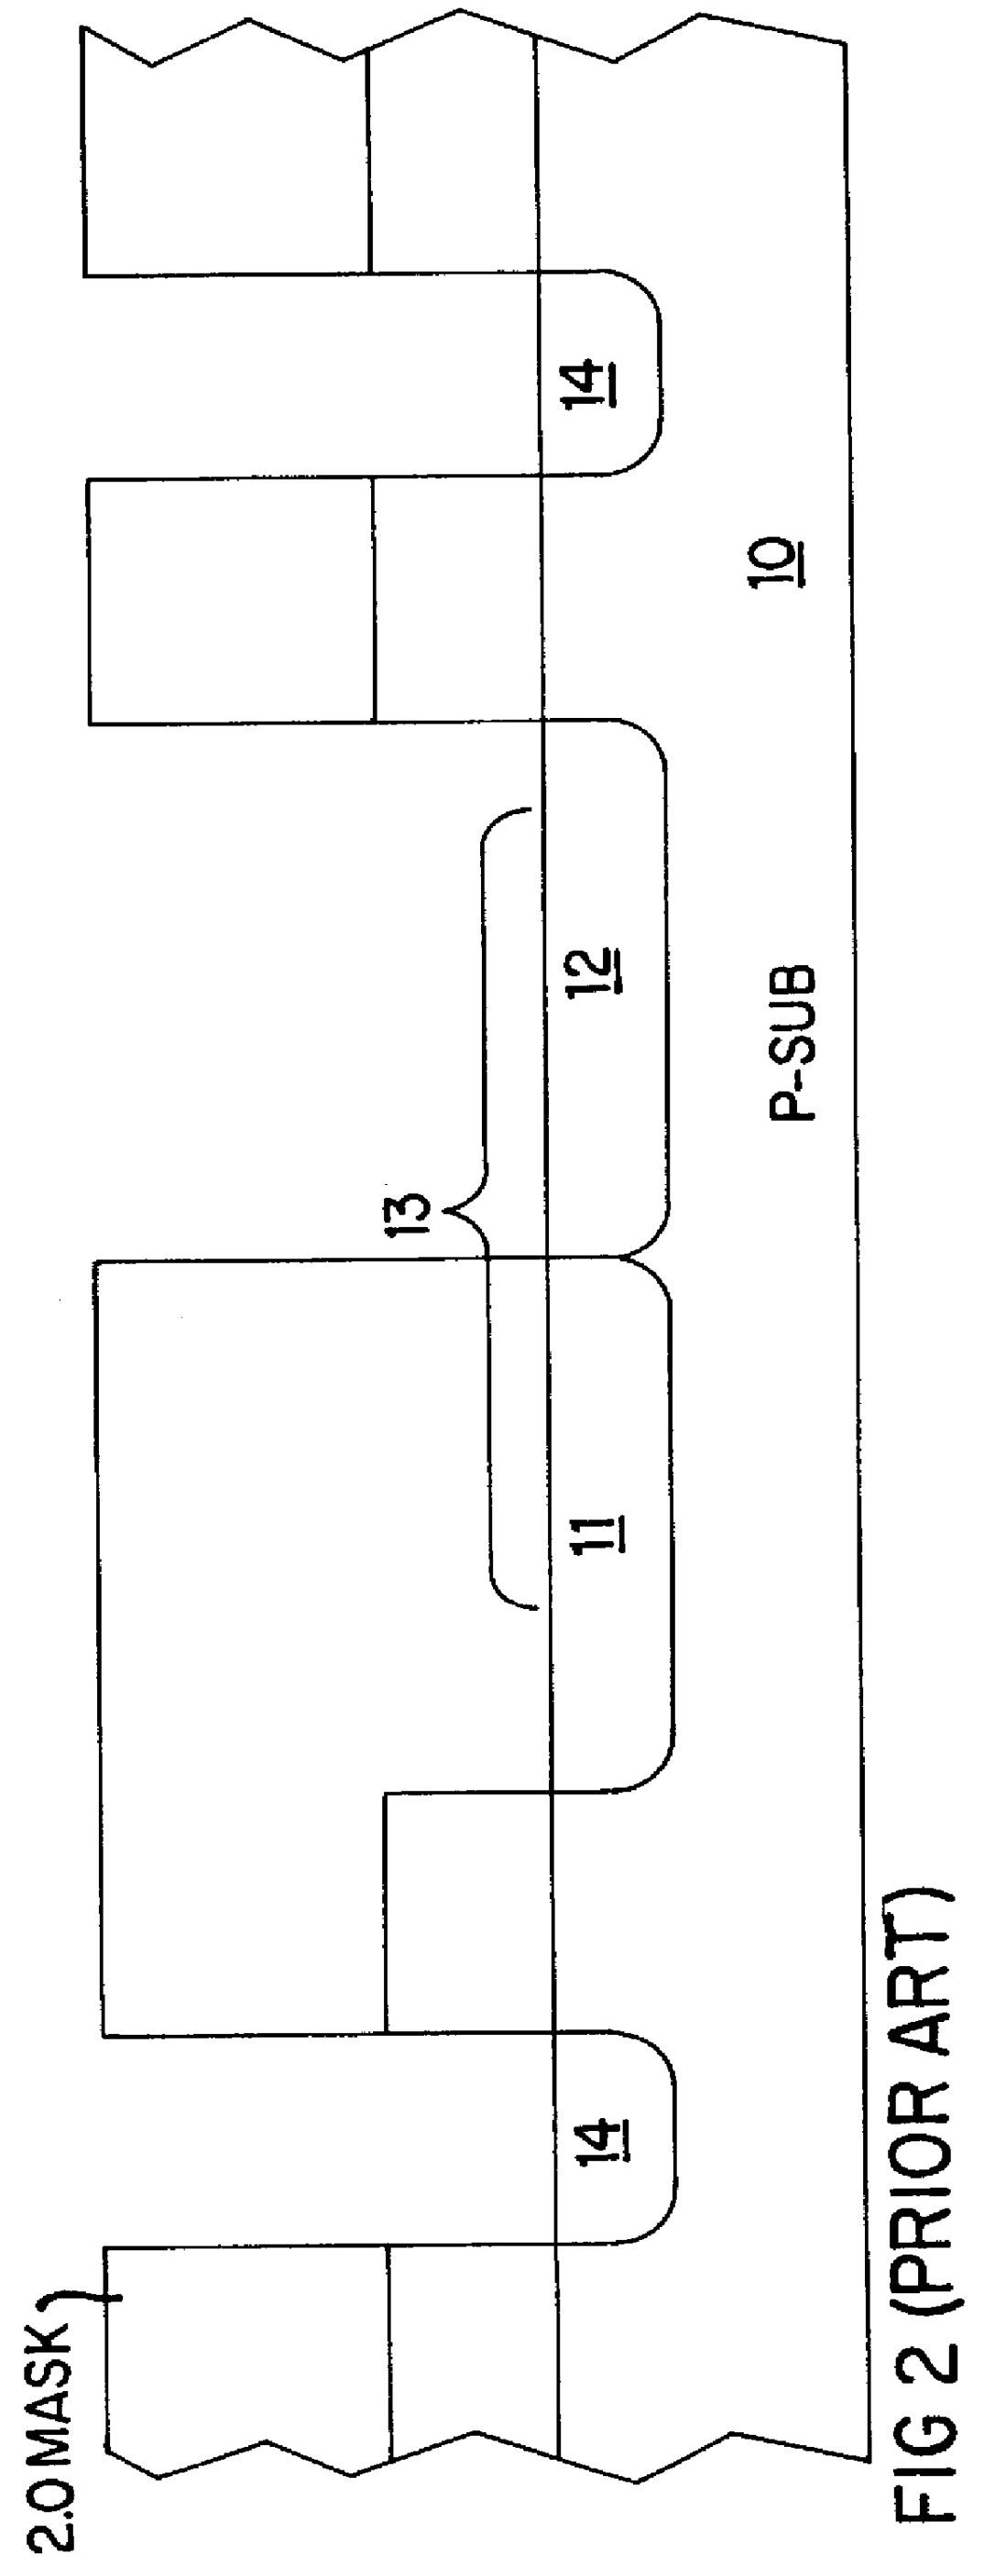 LDD structure for ESD protection and method of fabrication